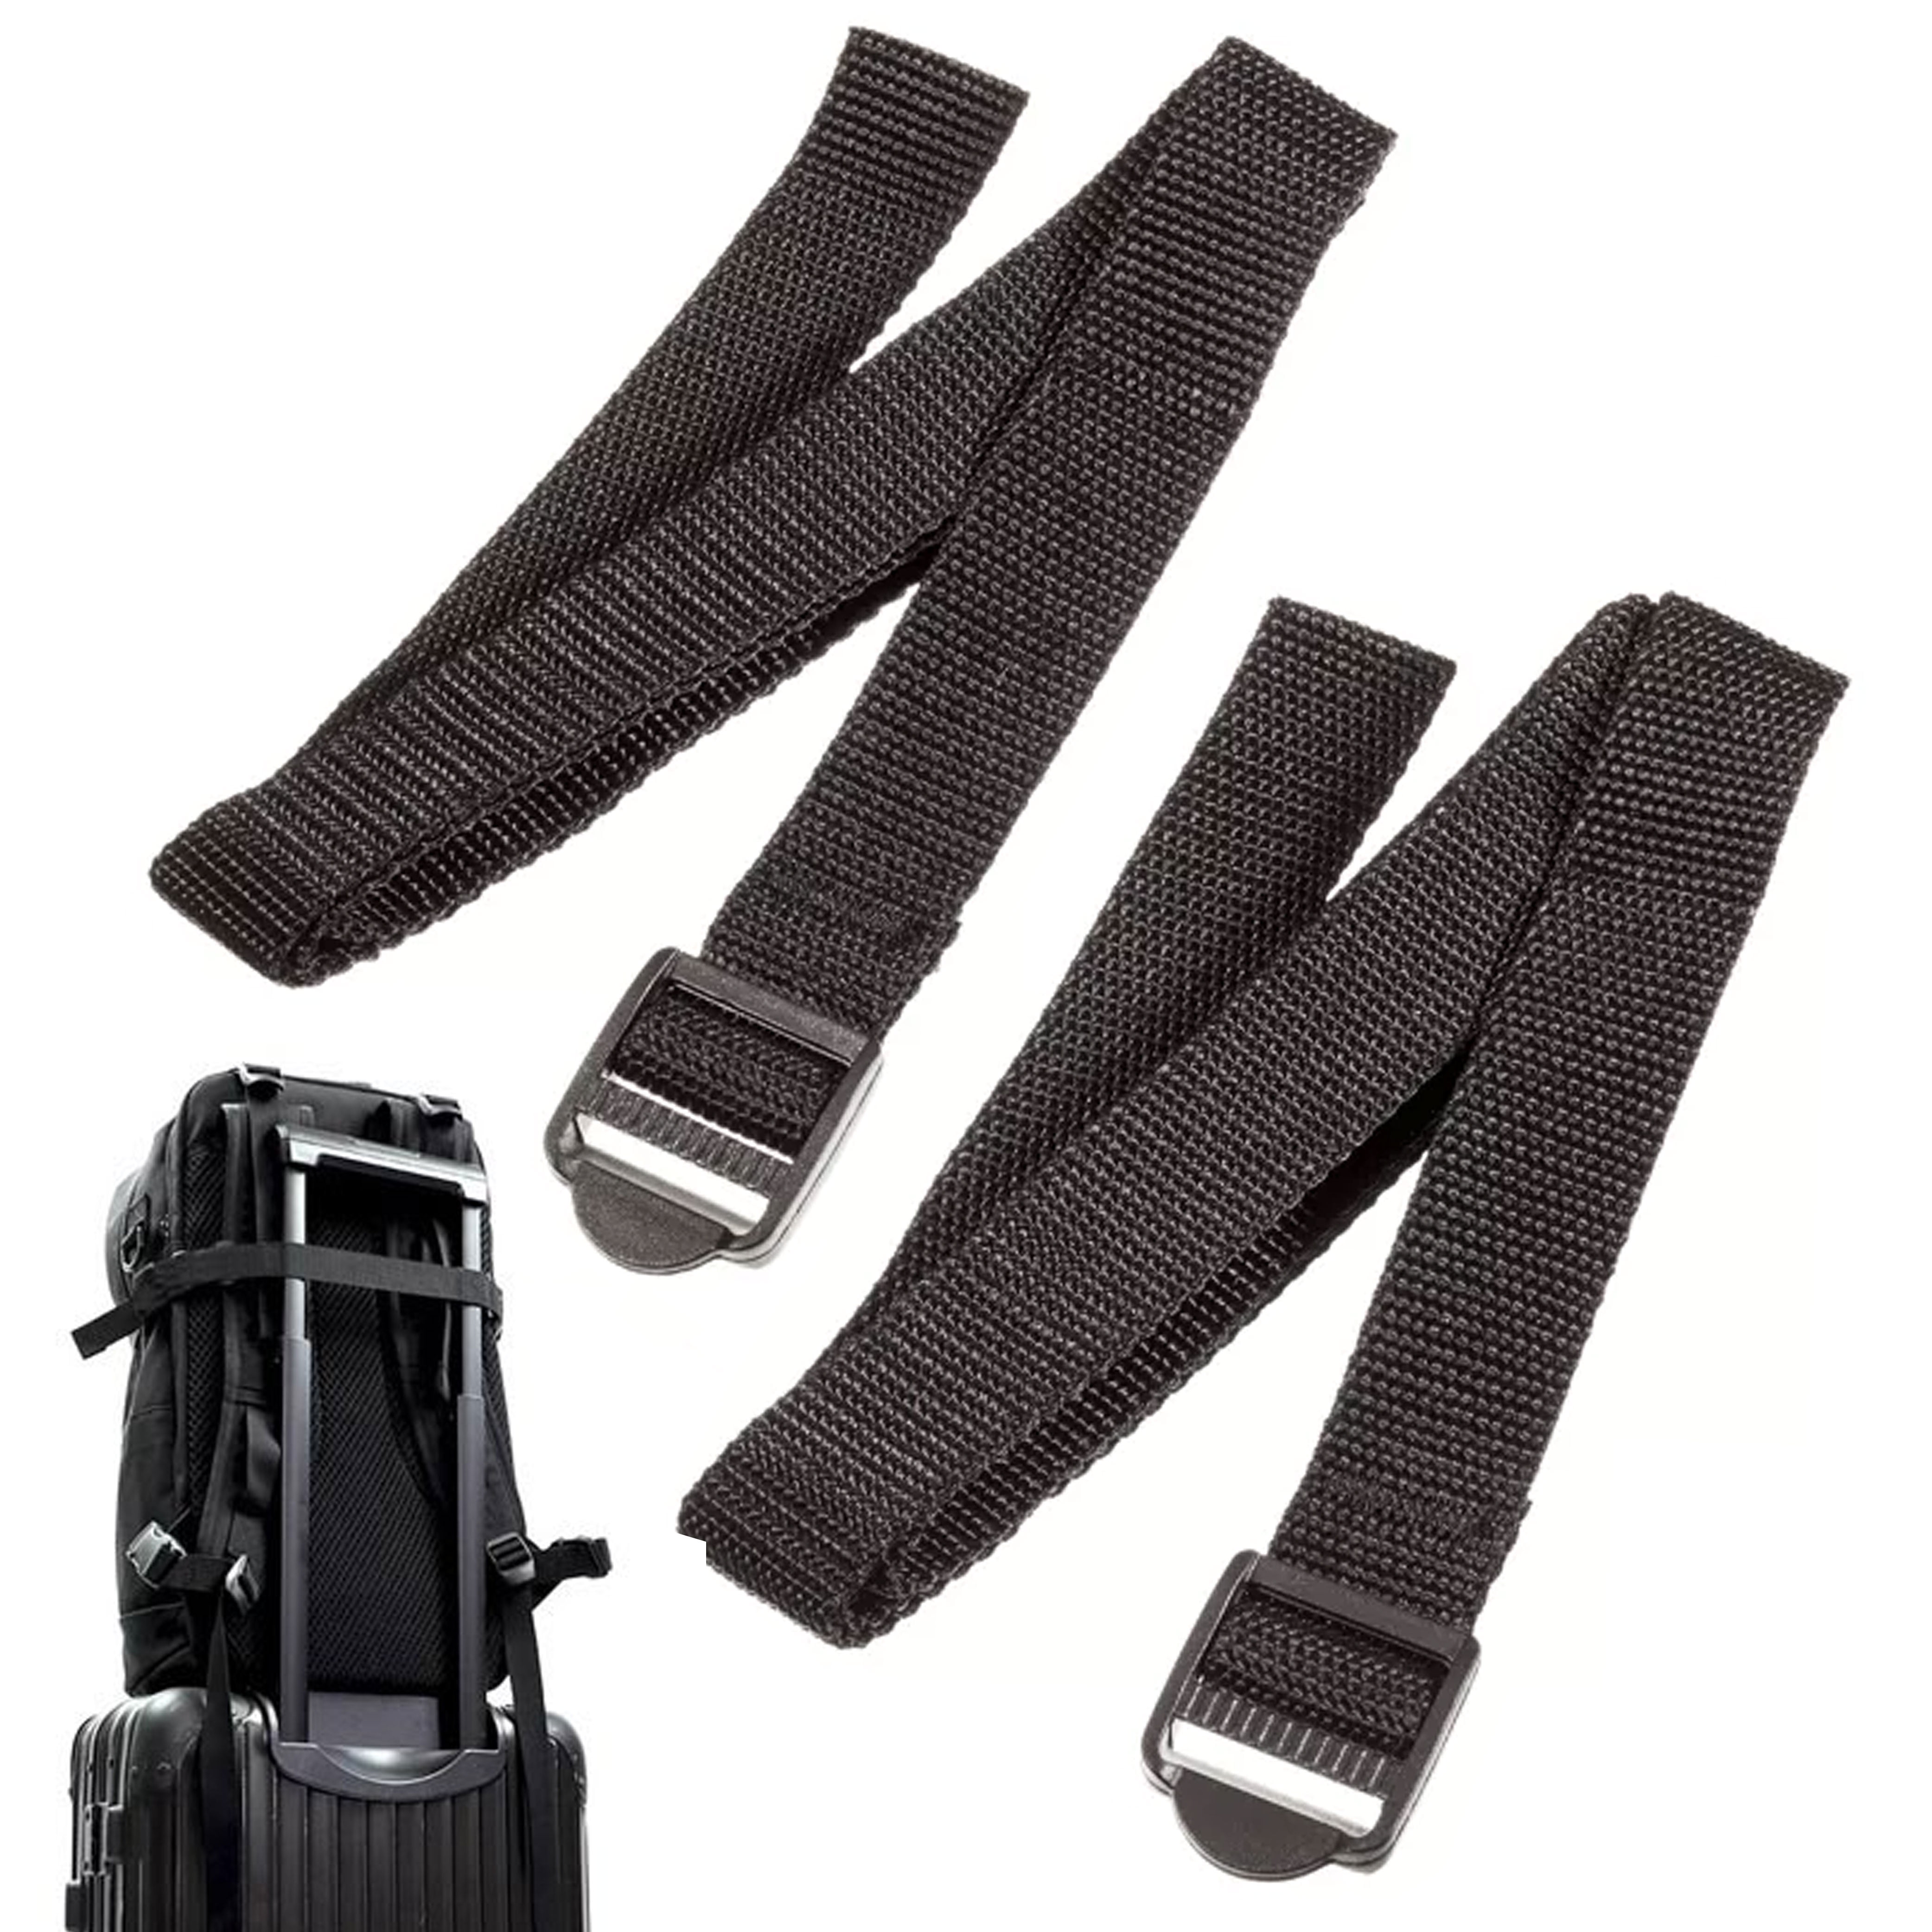 Tie Down strap With Heavy duty 2" Ladderlock buckle,,box strap Made in USA. 